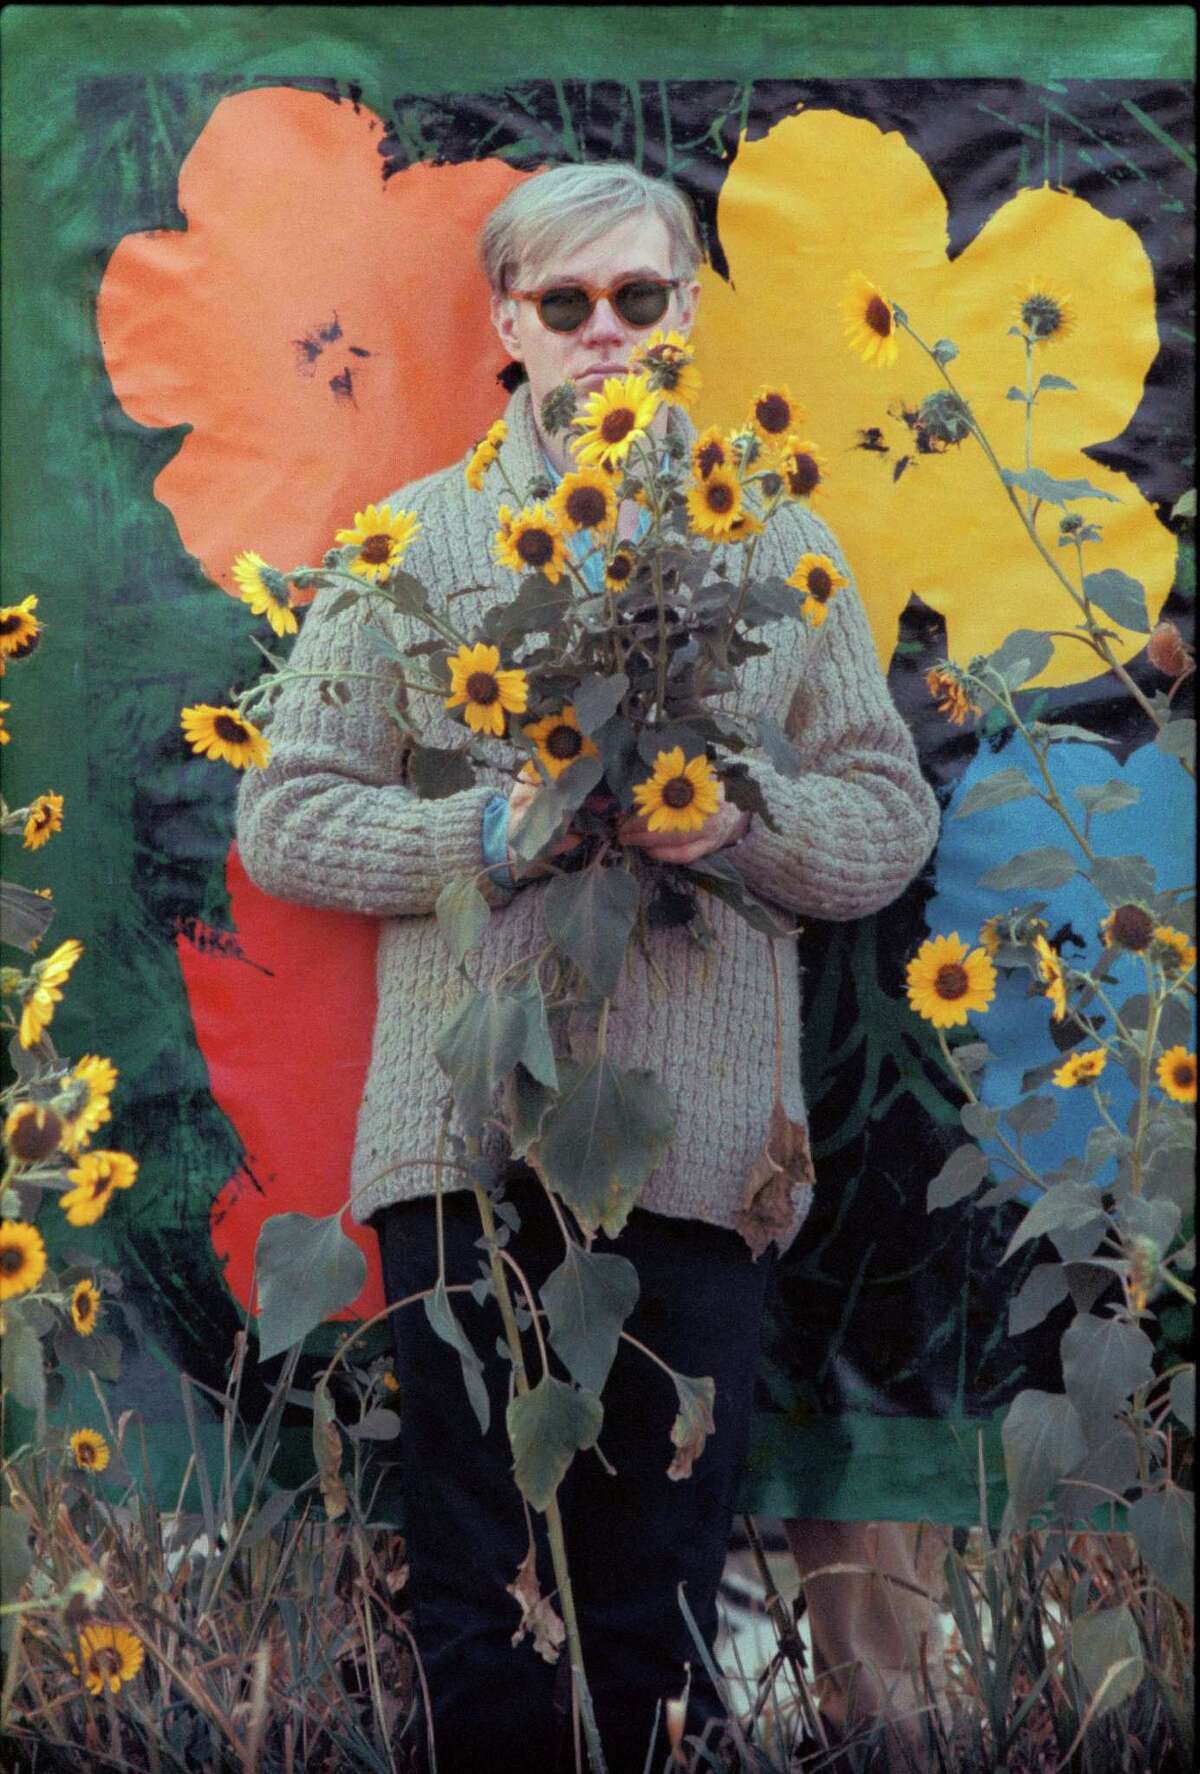 In this 1964 photo provided by Allen Cooper Enterprises, artist Andy Warhol stands in a field of Black-Eyed Susans in New York. The image will be featured in an exhibit entitled: "Before They Were Famous: Behind the Lens of William John Kennedy," which opens on April 19th at the Site/109 gallery in New York. (AP Photo/William John Kennedy via Allen Cooper Enterprises)